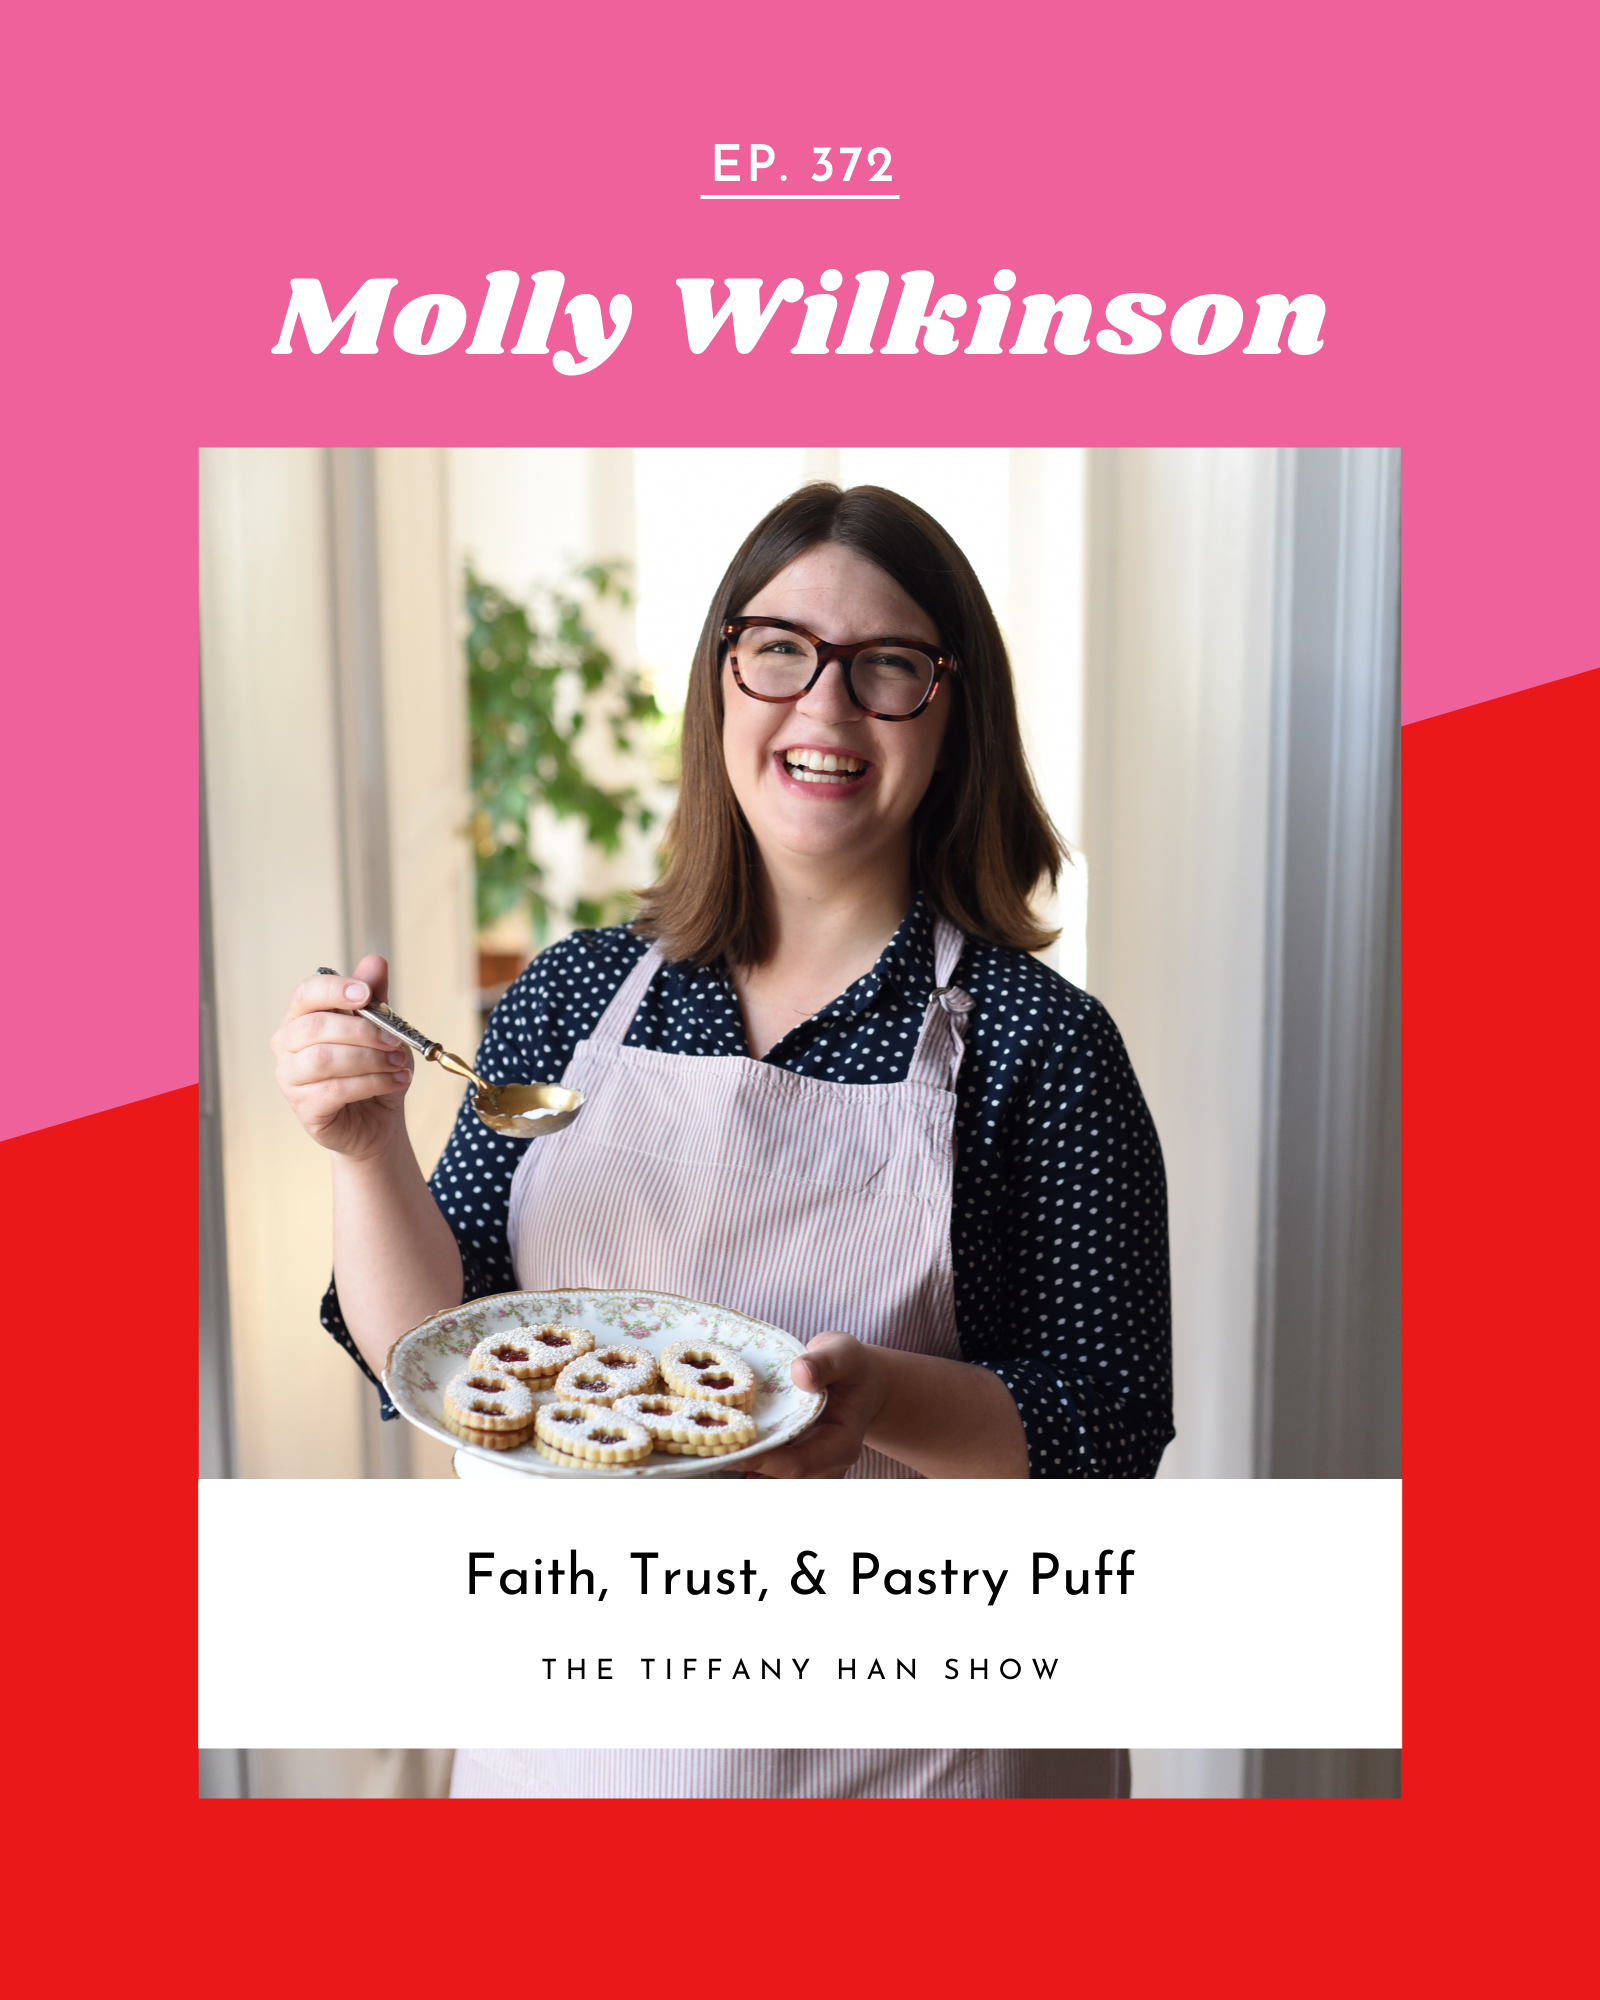 Faith, Trust, and Pastry Puff with Molly Wilkinson